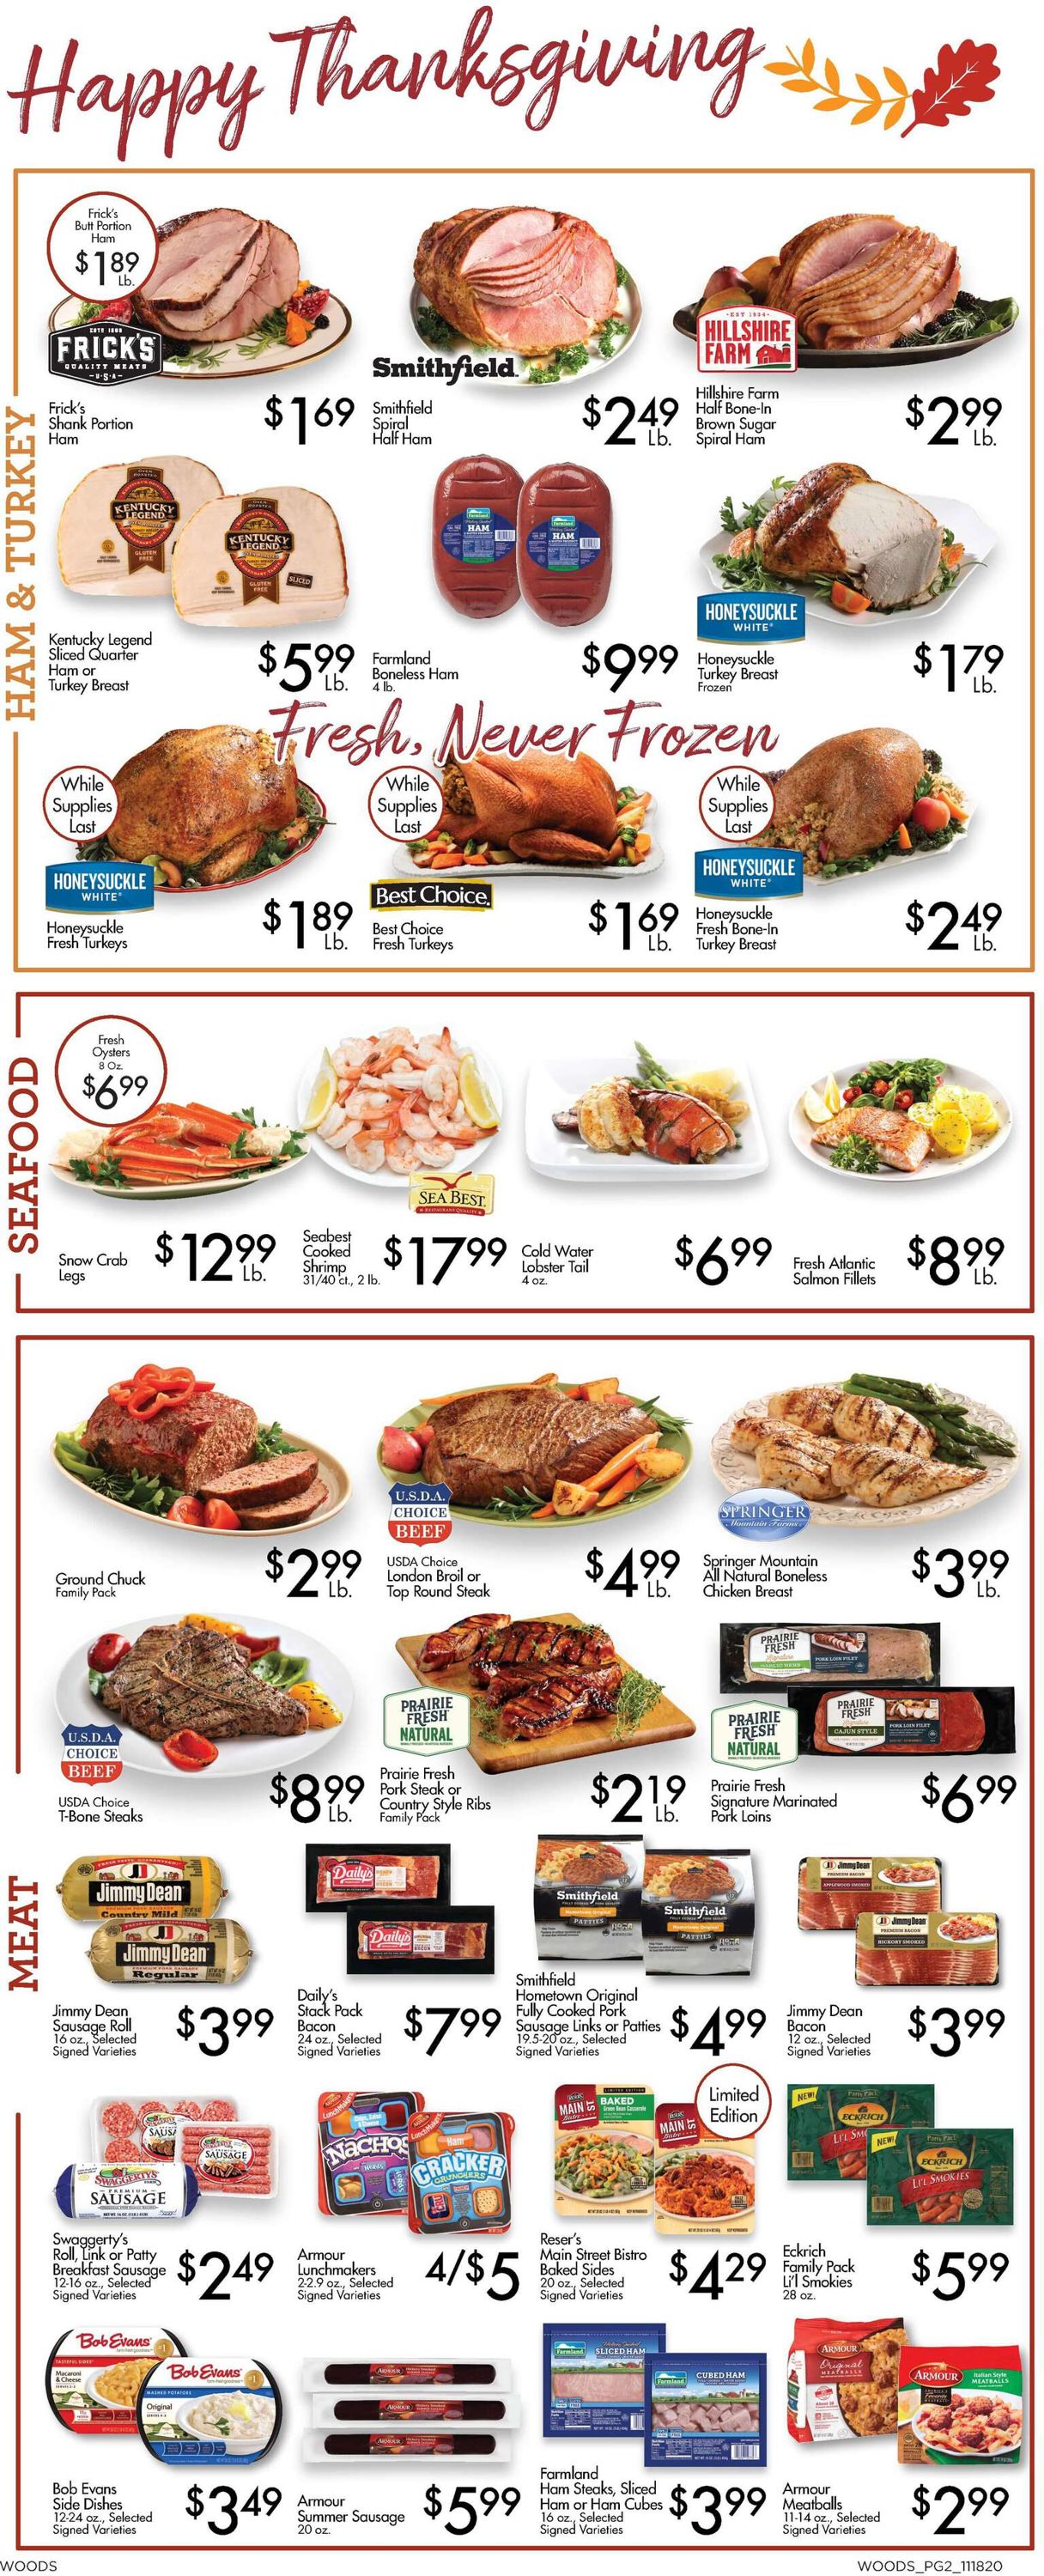 Catalogue Woods Supermarket Thanksgiving ad 2020 from 11/18/2020